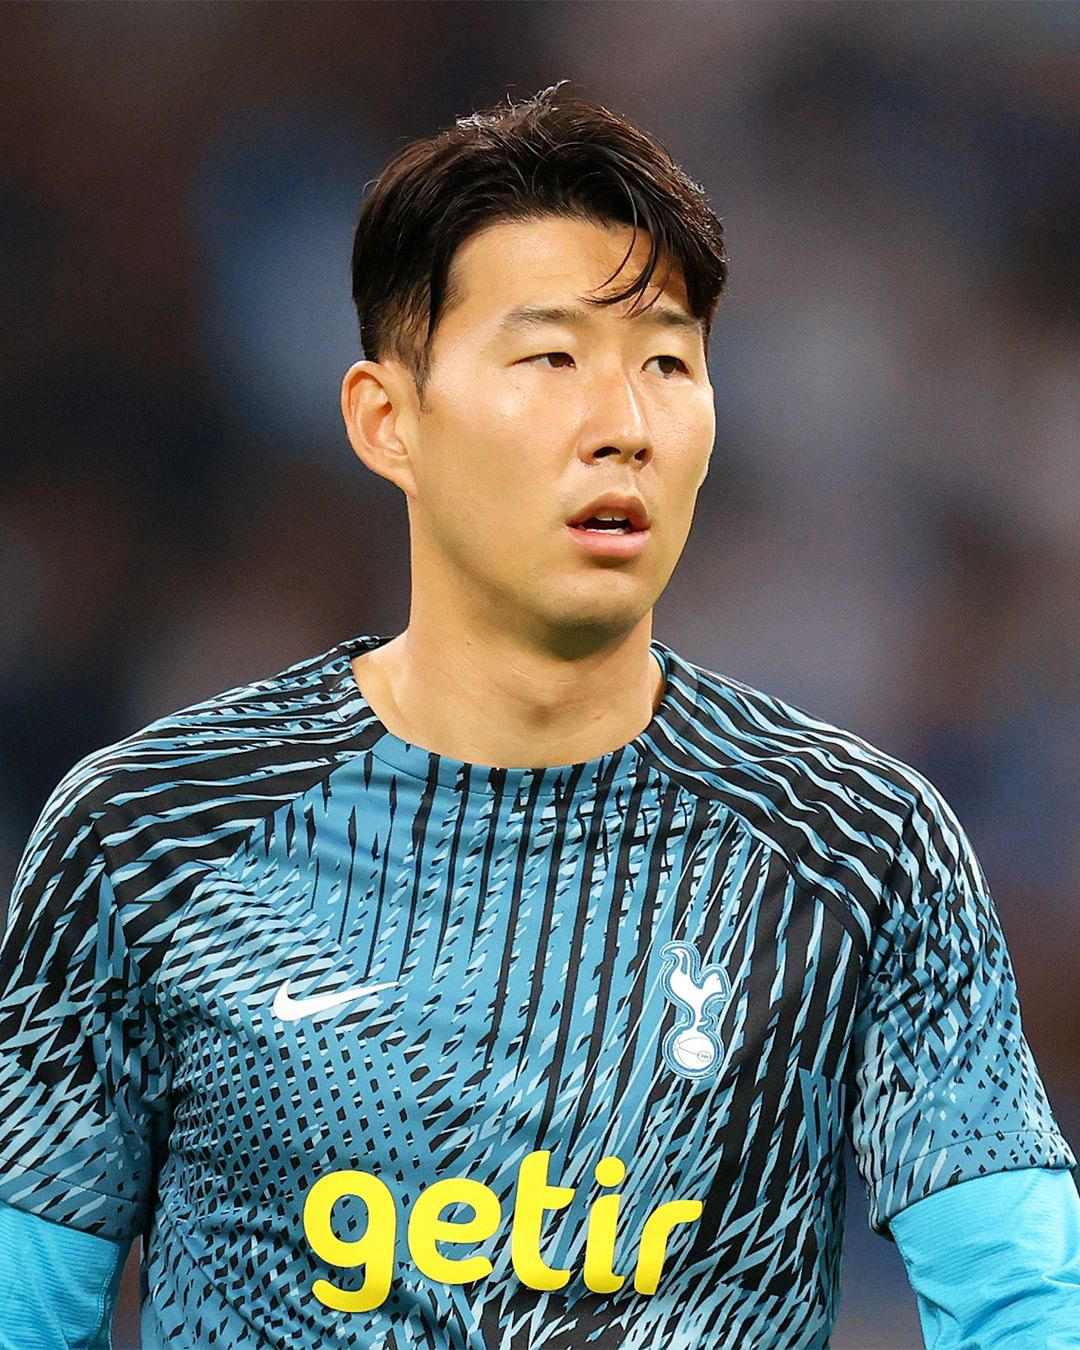 image  1 Tottenham Hotspur - We can confirm that Heung-Min Son will undergo surgery to stabilise a fracture a